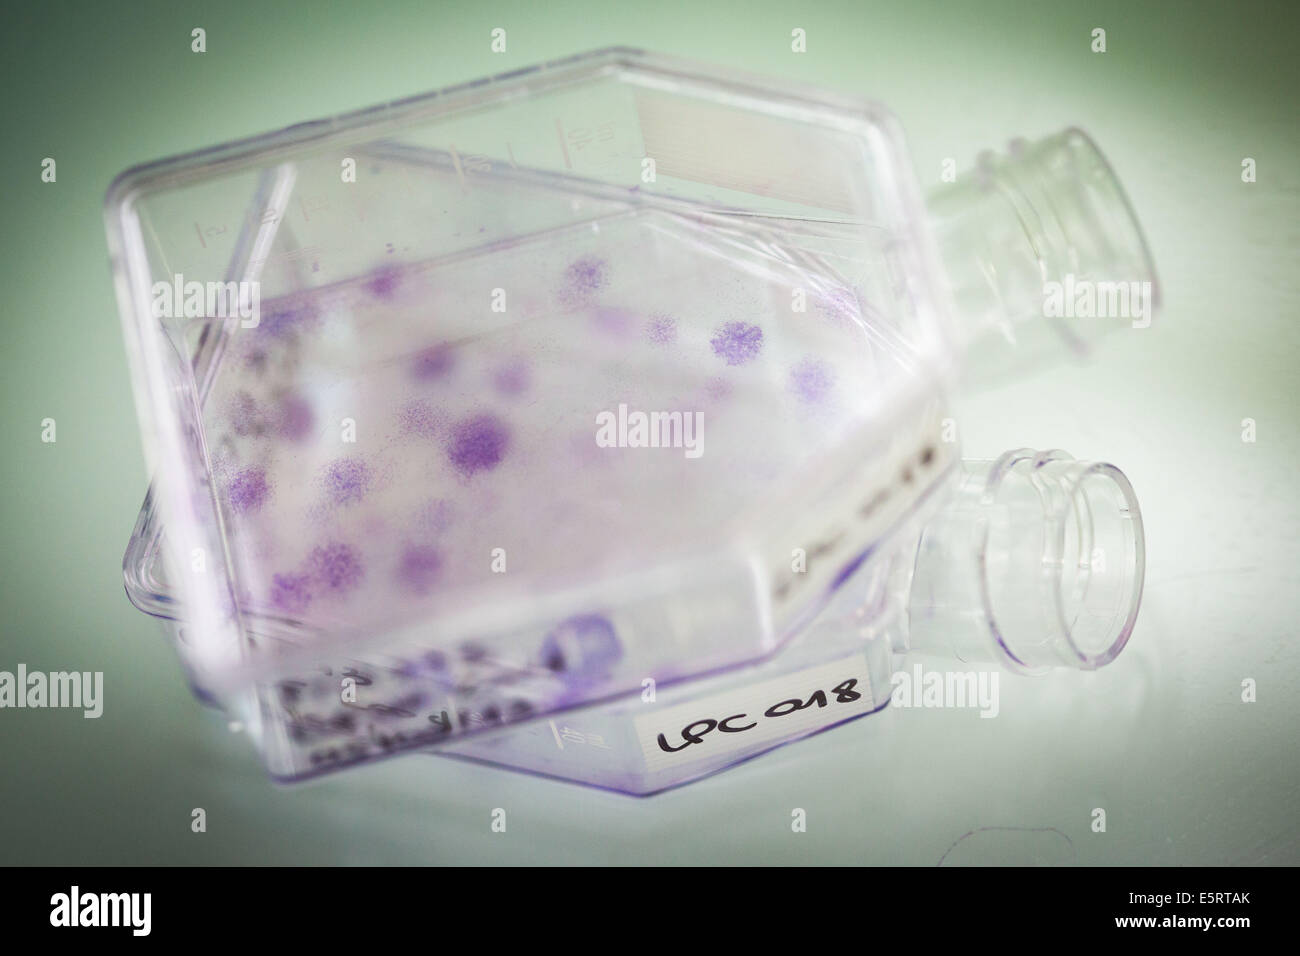 Cultures of clonogenic Mesenchymal Stem Cells (MSC), colonies of cells are stained purple. Stock Photo